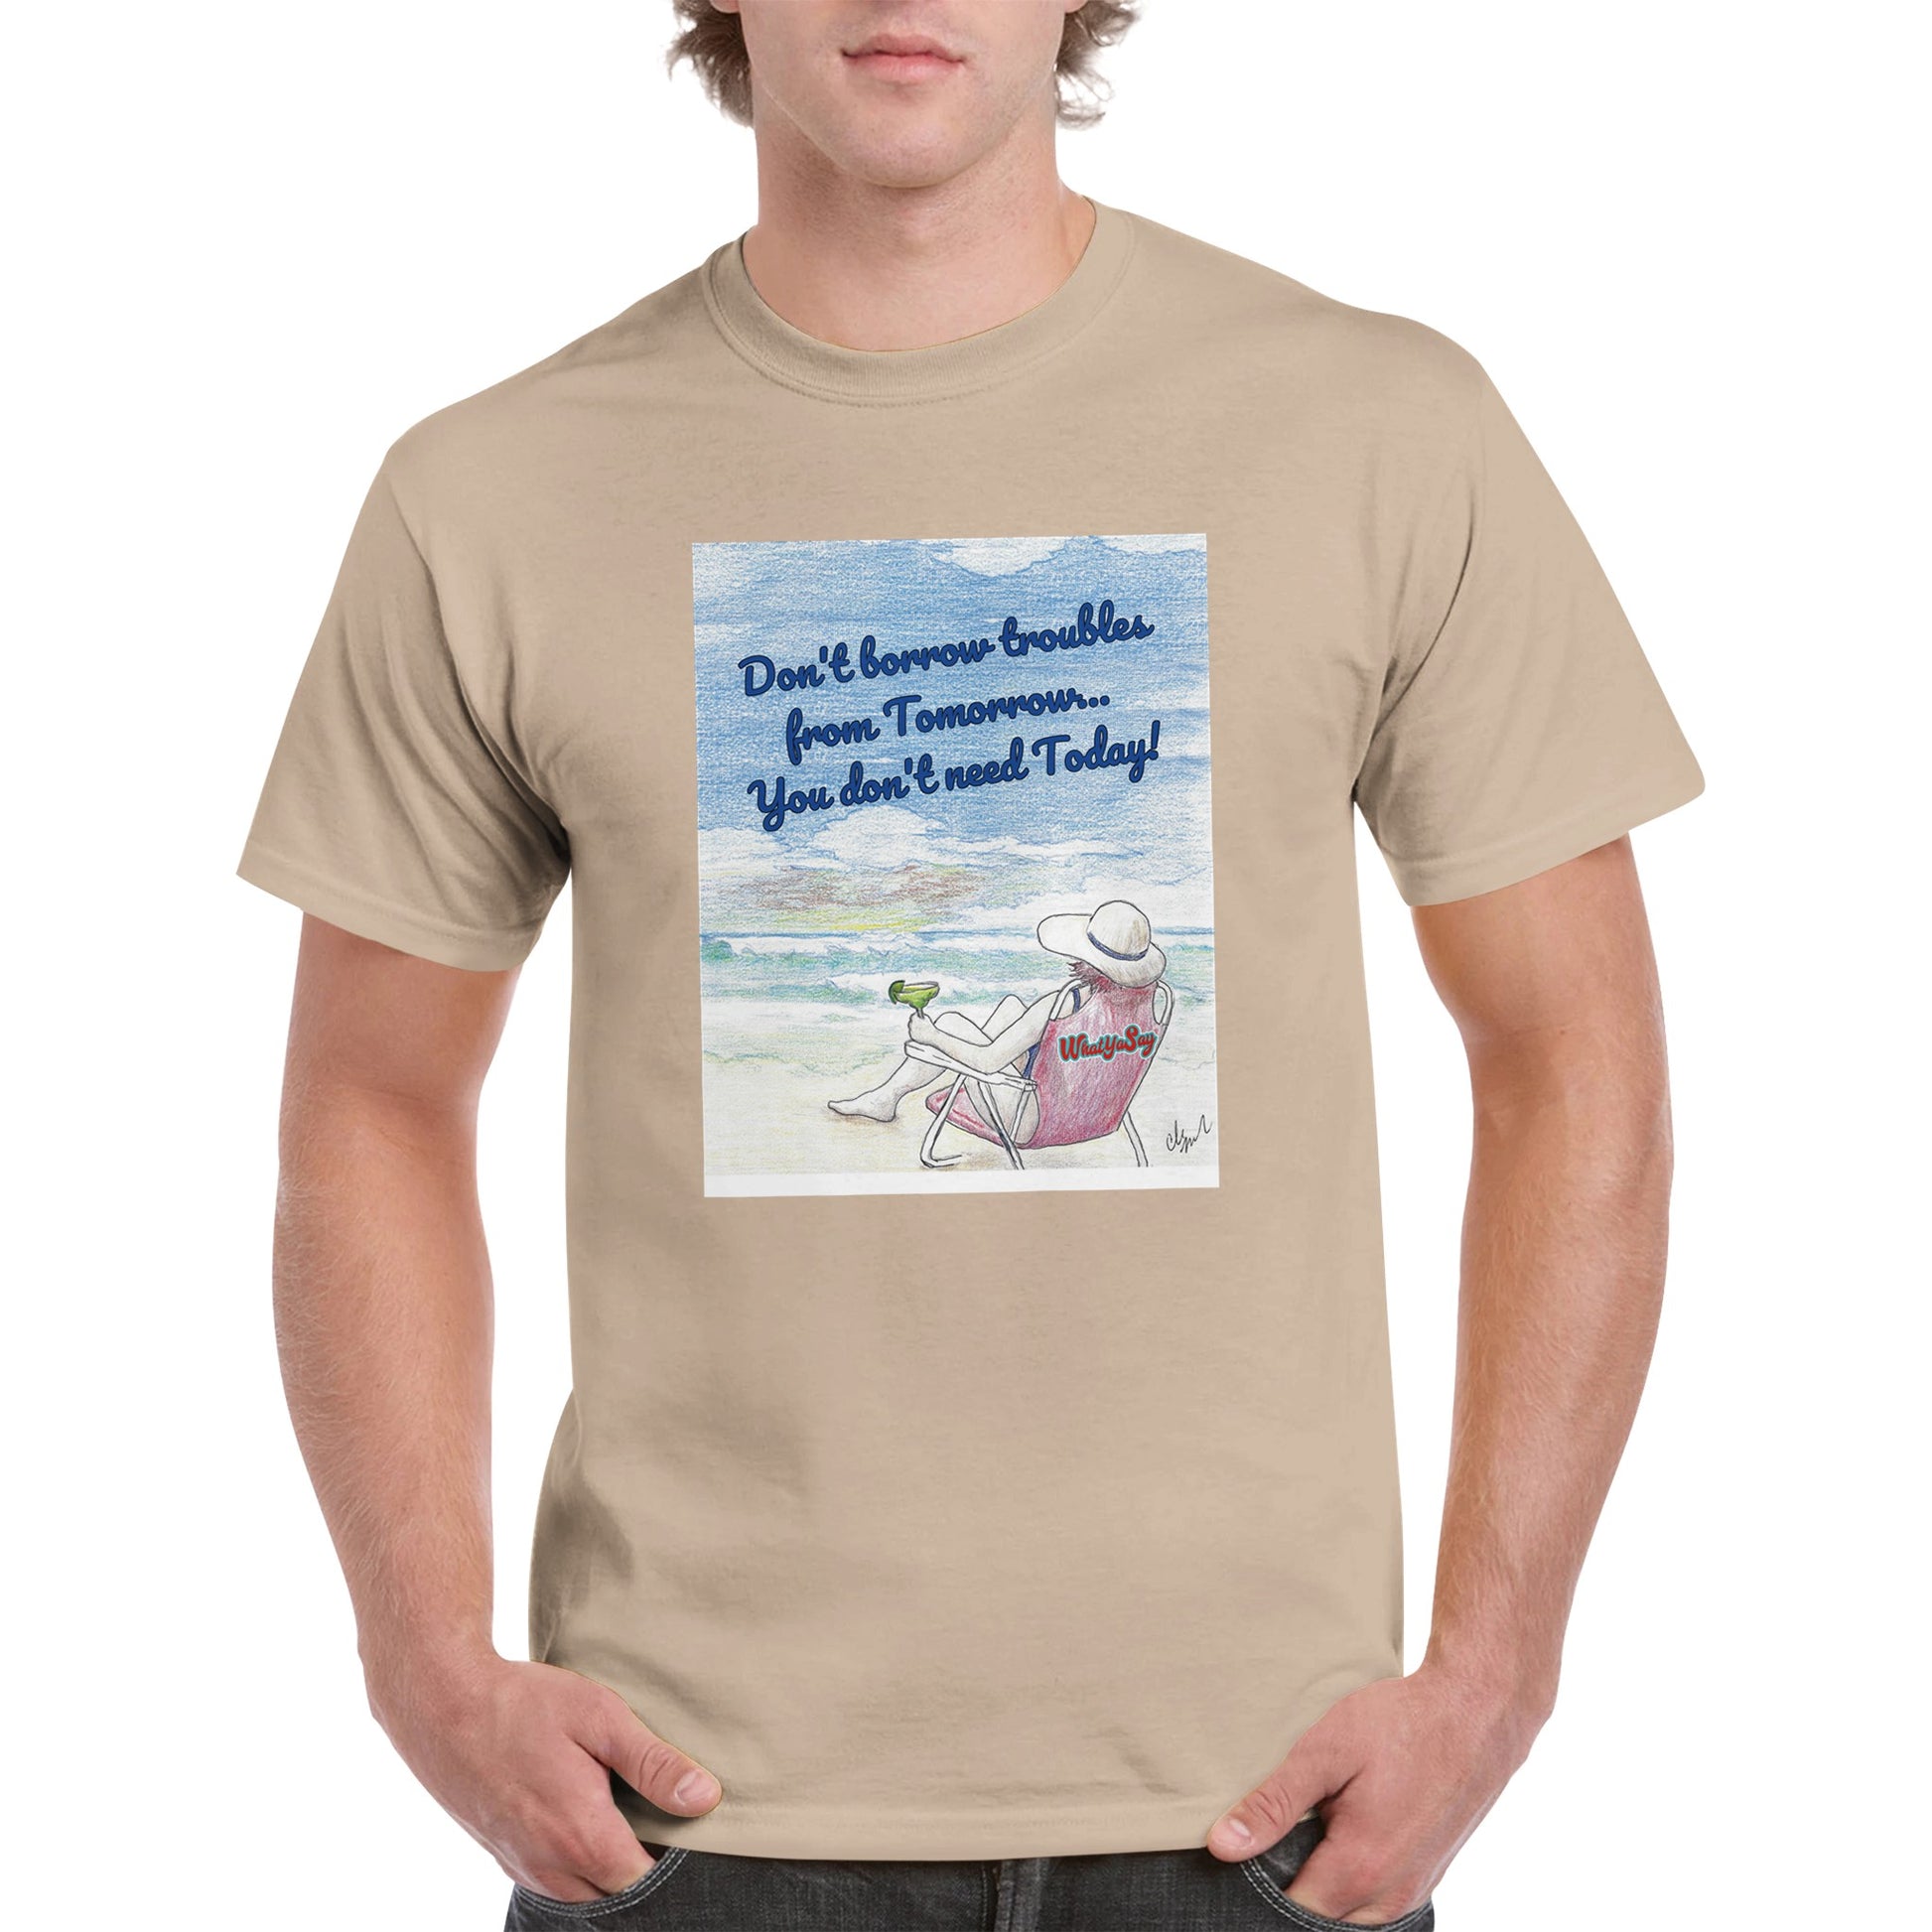 A sand heavyweight Unisex Crewneck t-shirt with original artwork and motto Don’t borrow troubles from Tomorrow… You don’t need Today! on front with WhatYa Say logo on image from WhatYa Say Apparel worn by blonde-haired male front view.